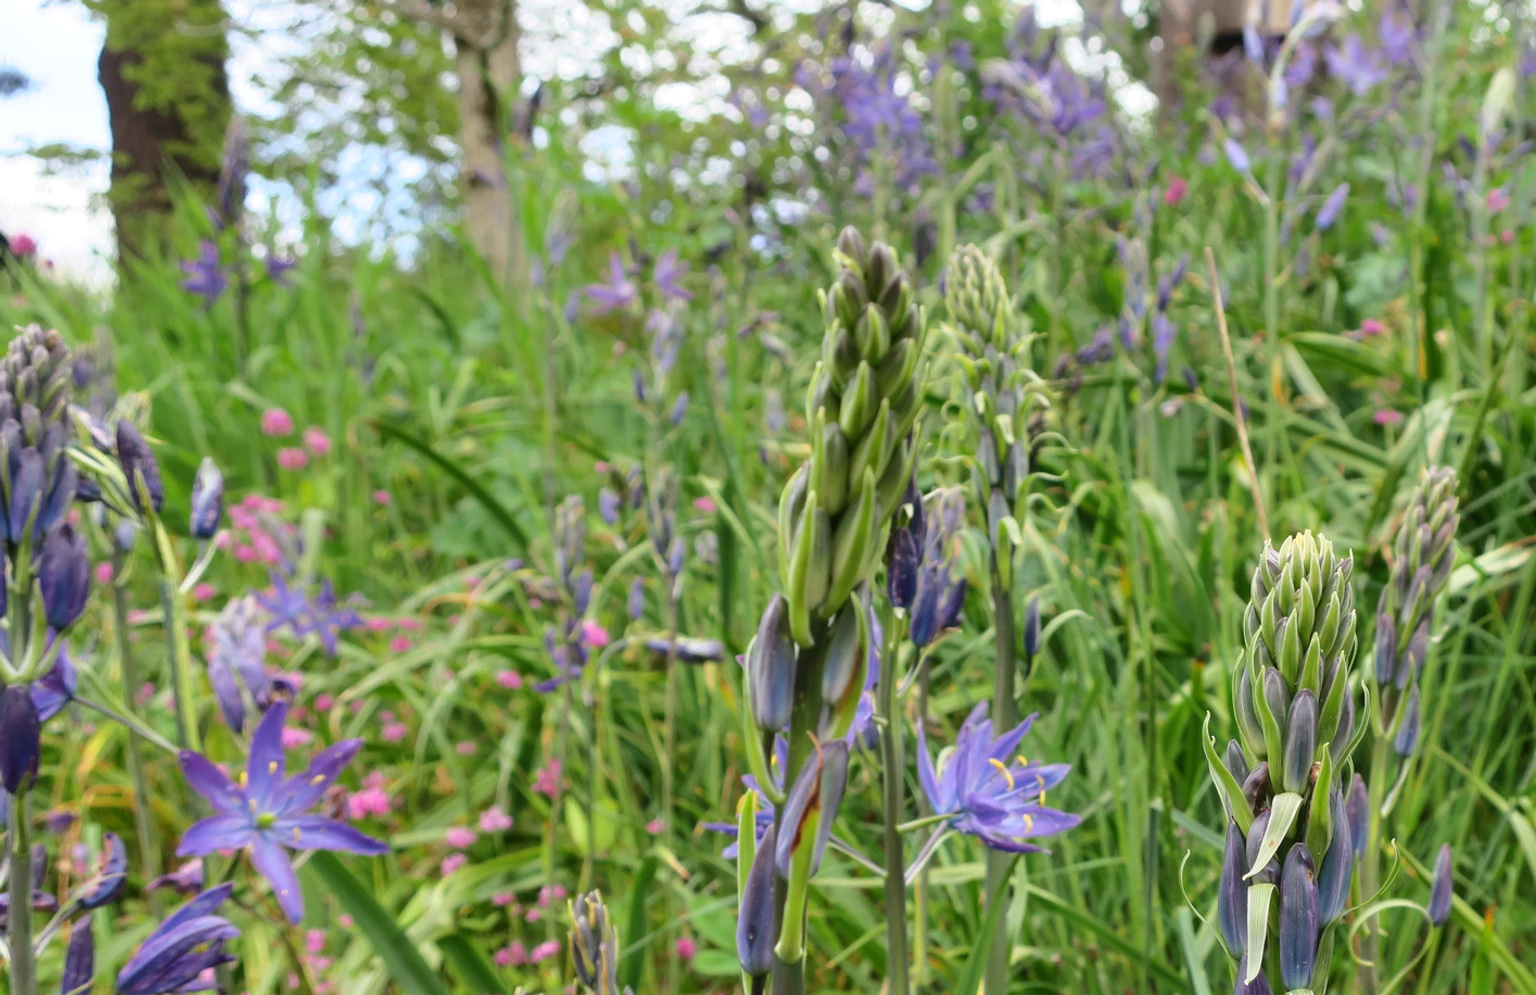 Camassia just coming into bloom. Early May